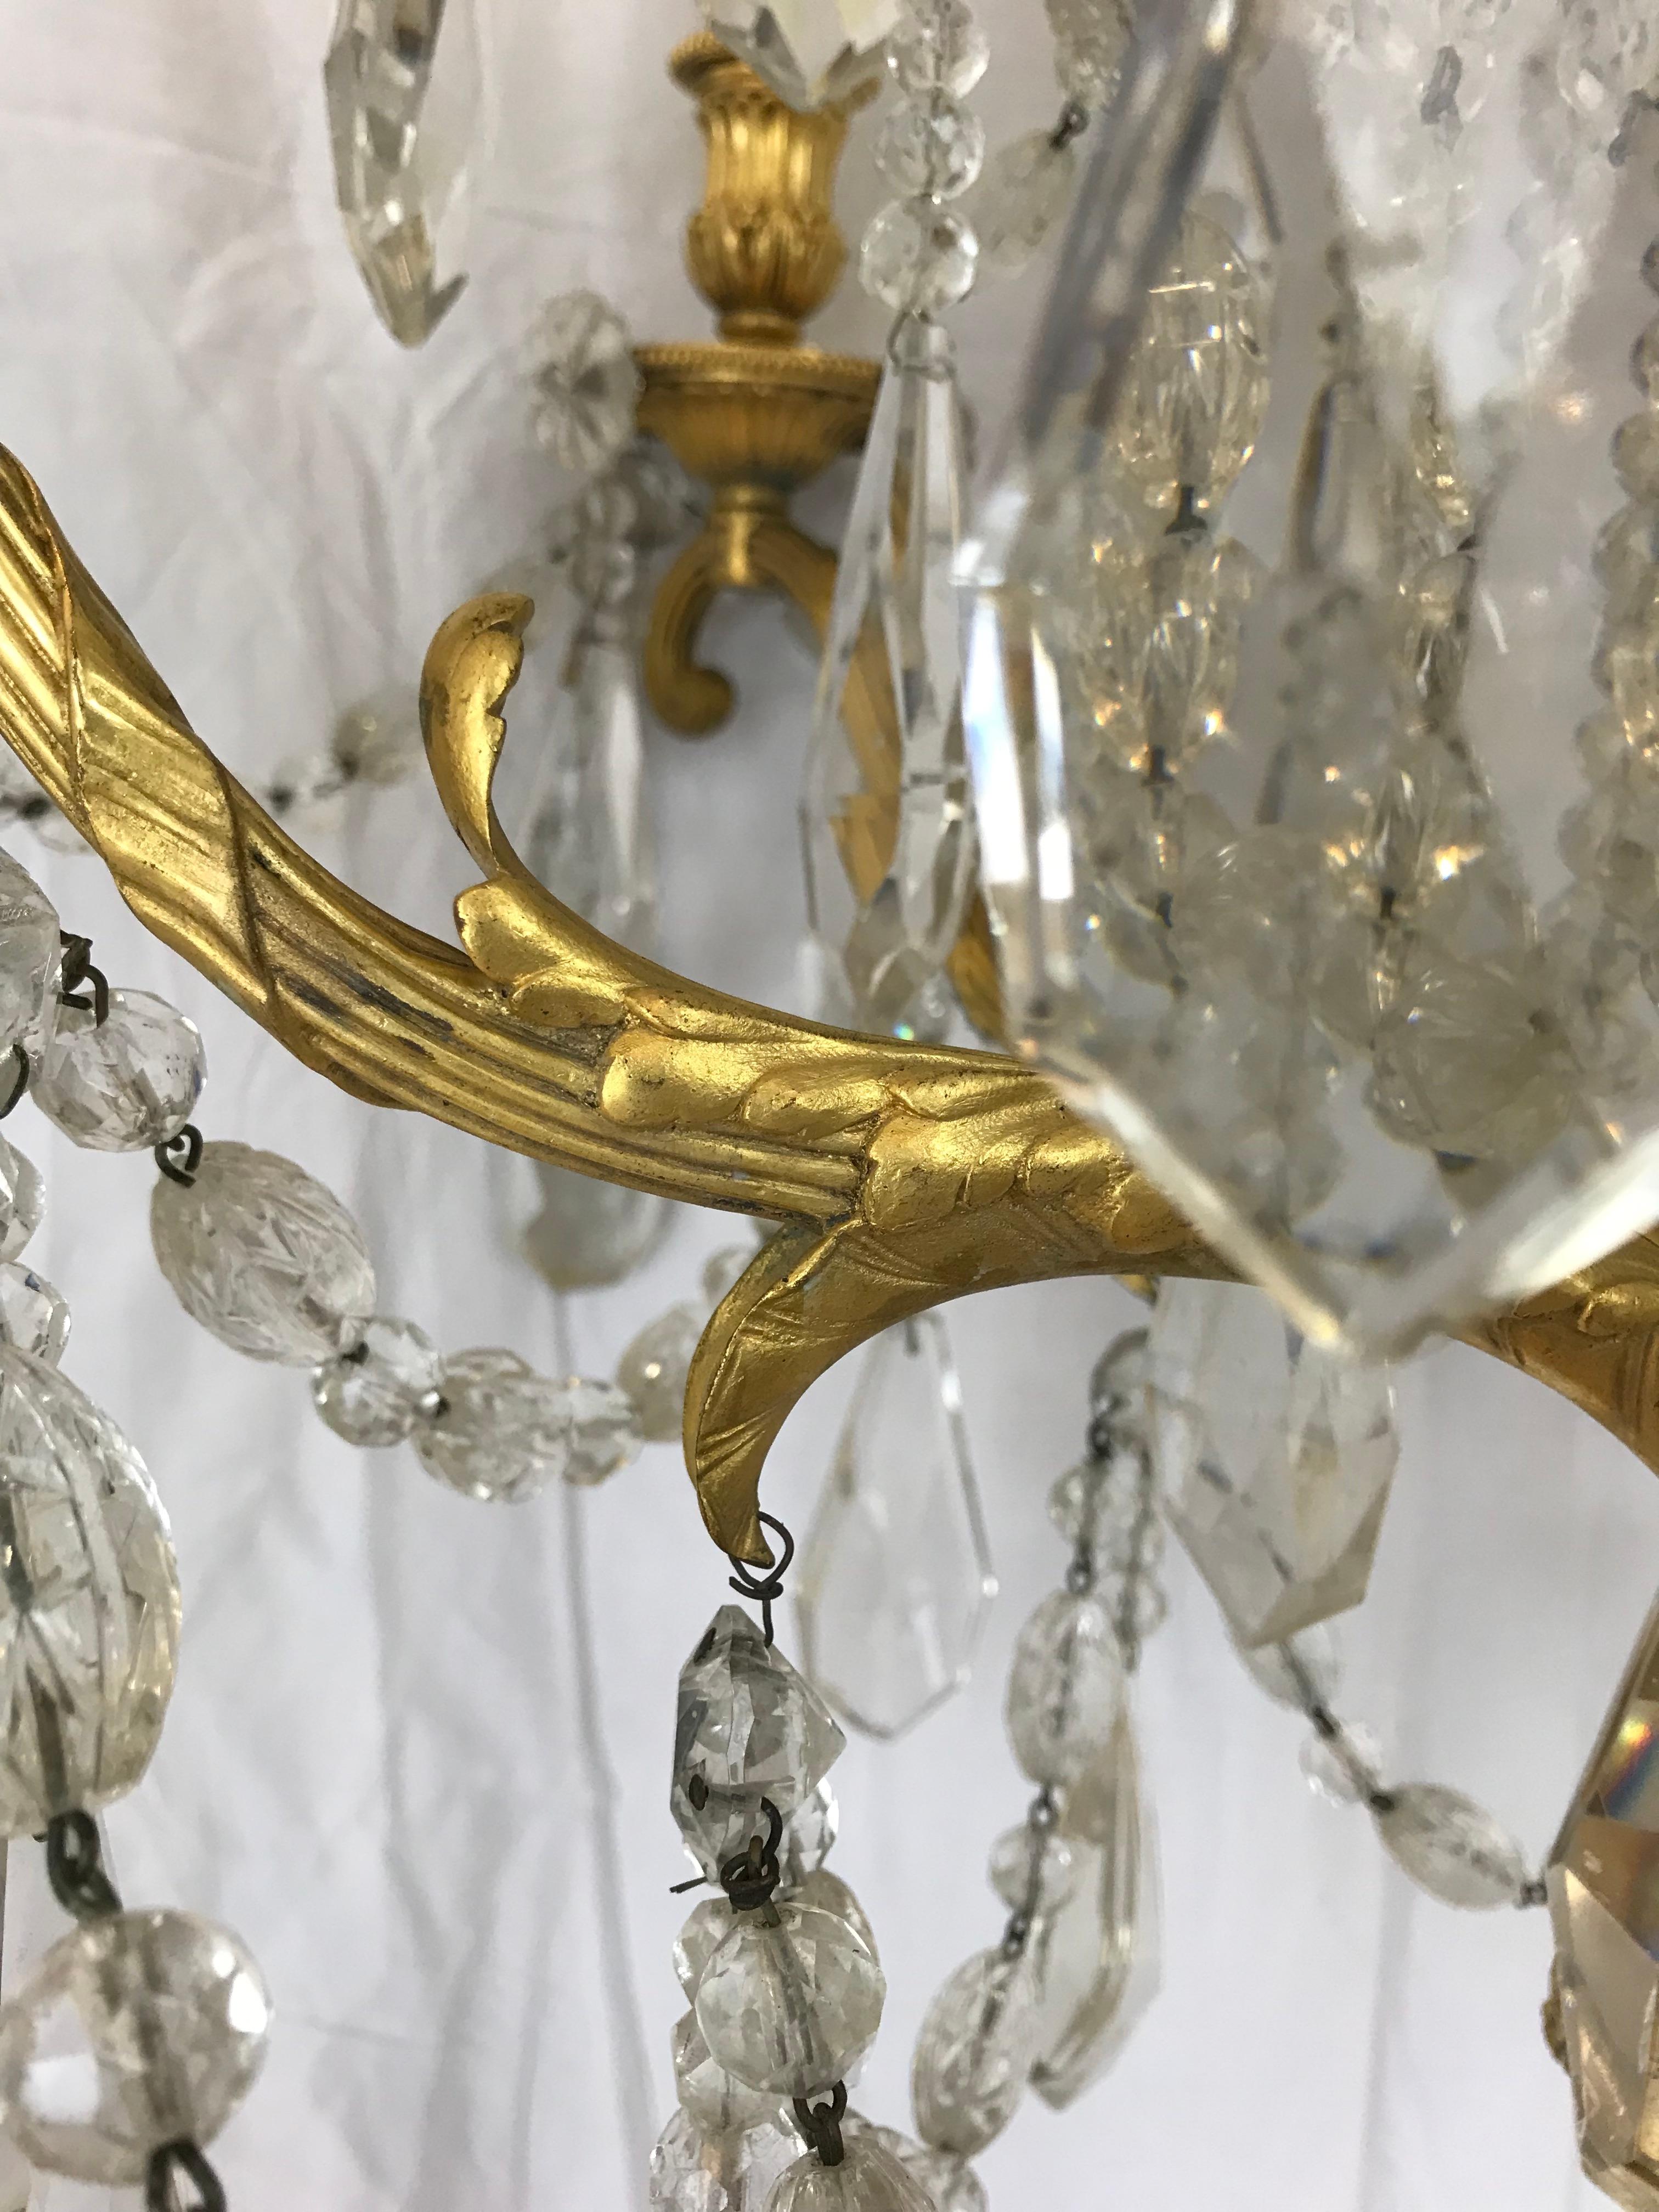 Signed E. F. Caldwell Gilt Bronze and Crystal Louis XVI Style Chandelier For Sale 3